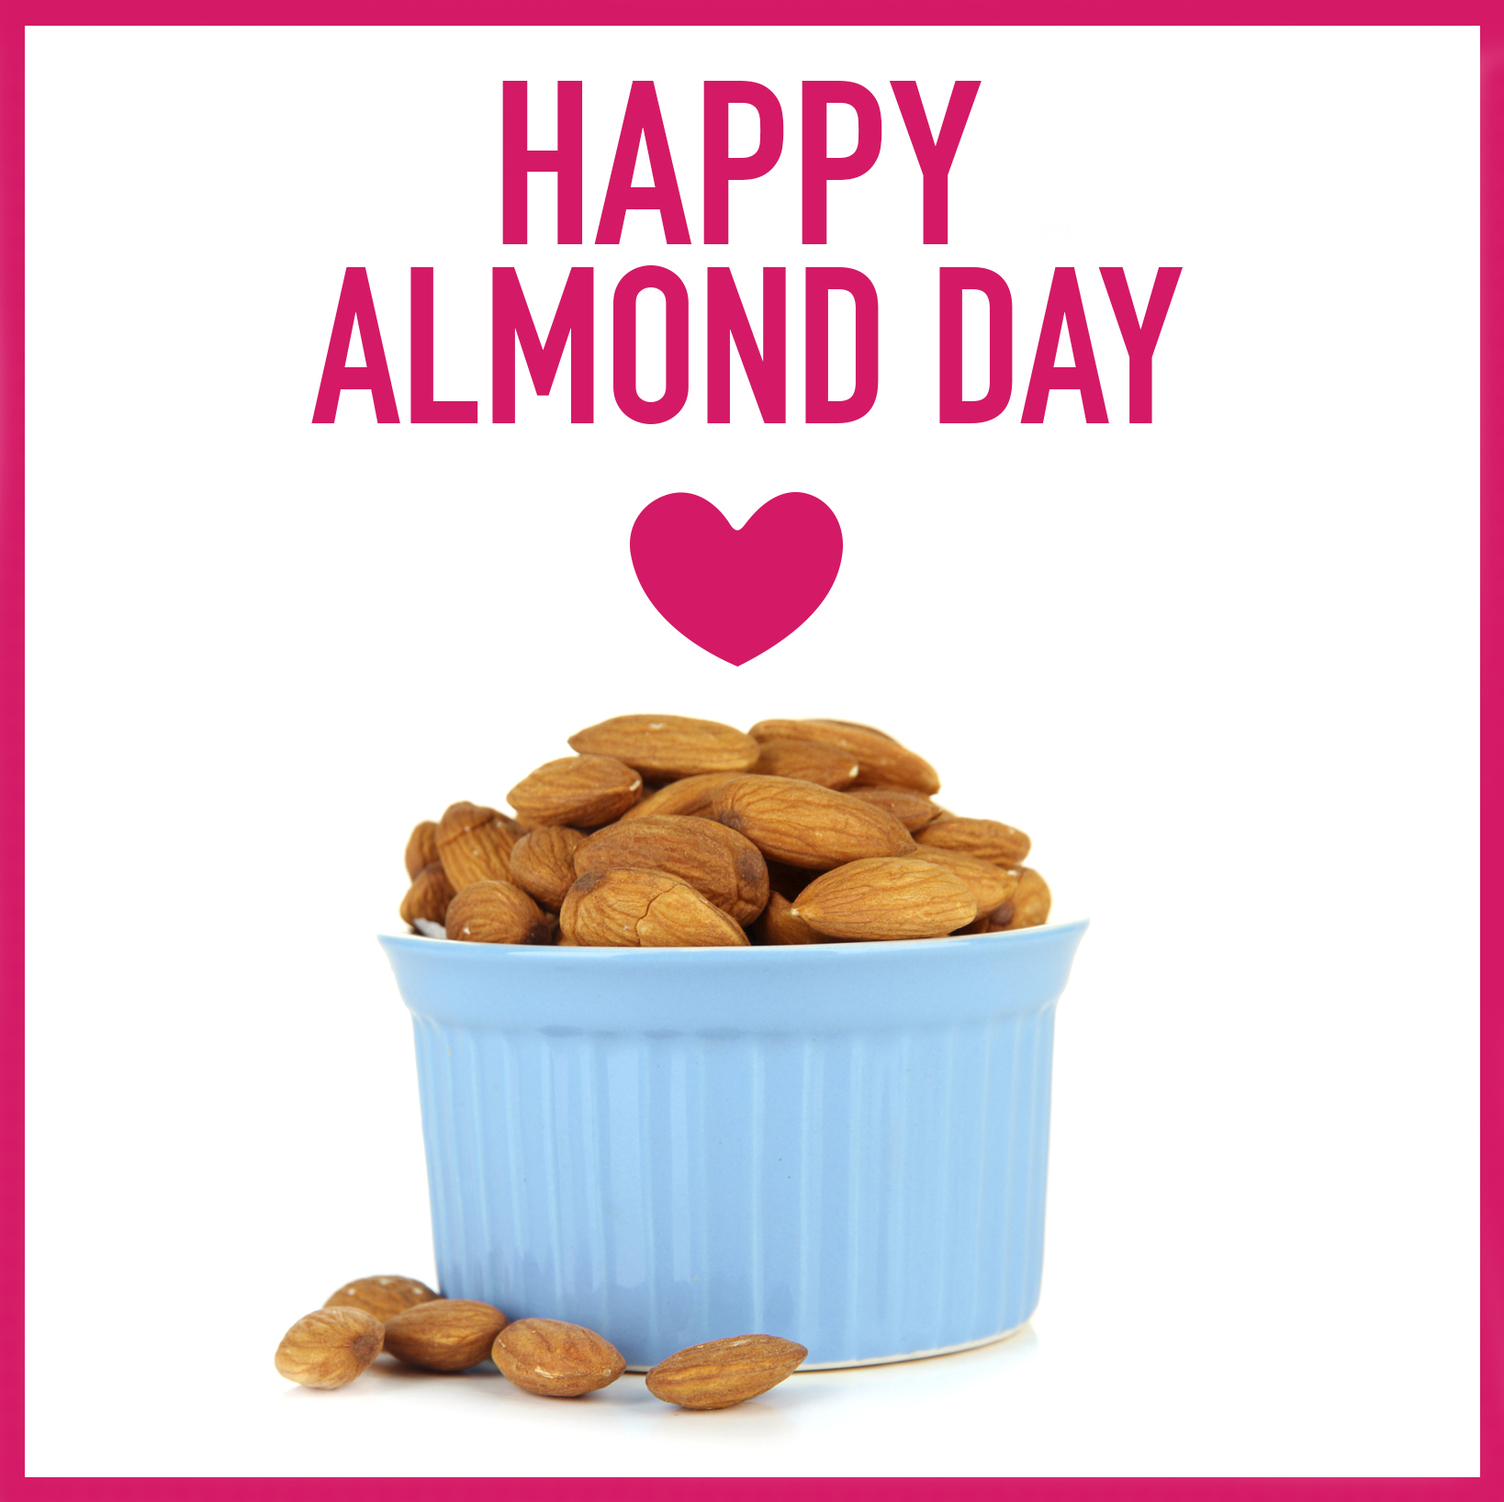 Celebrate Your Favorite Heart-Smart Nut on Almond Day!